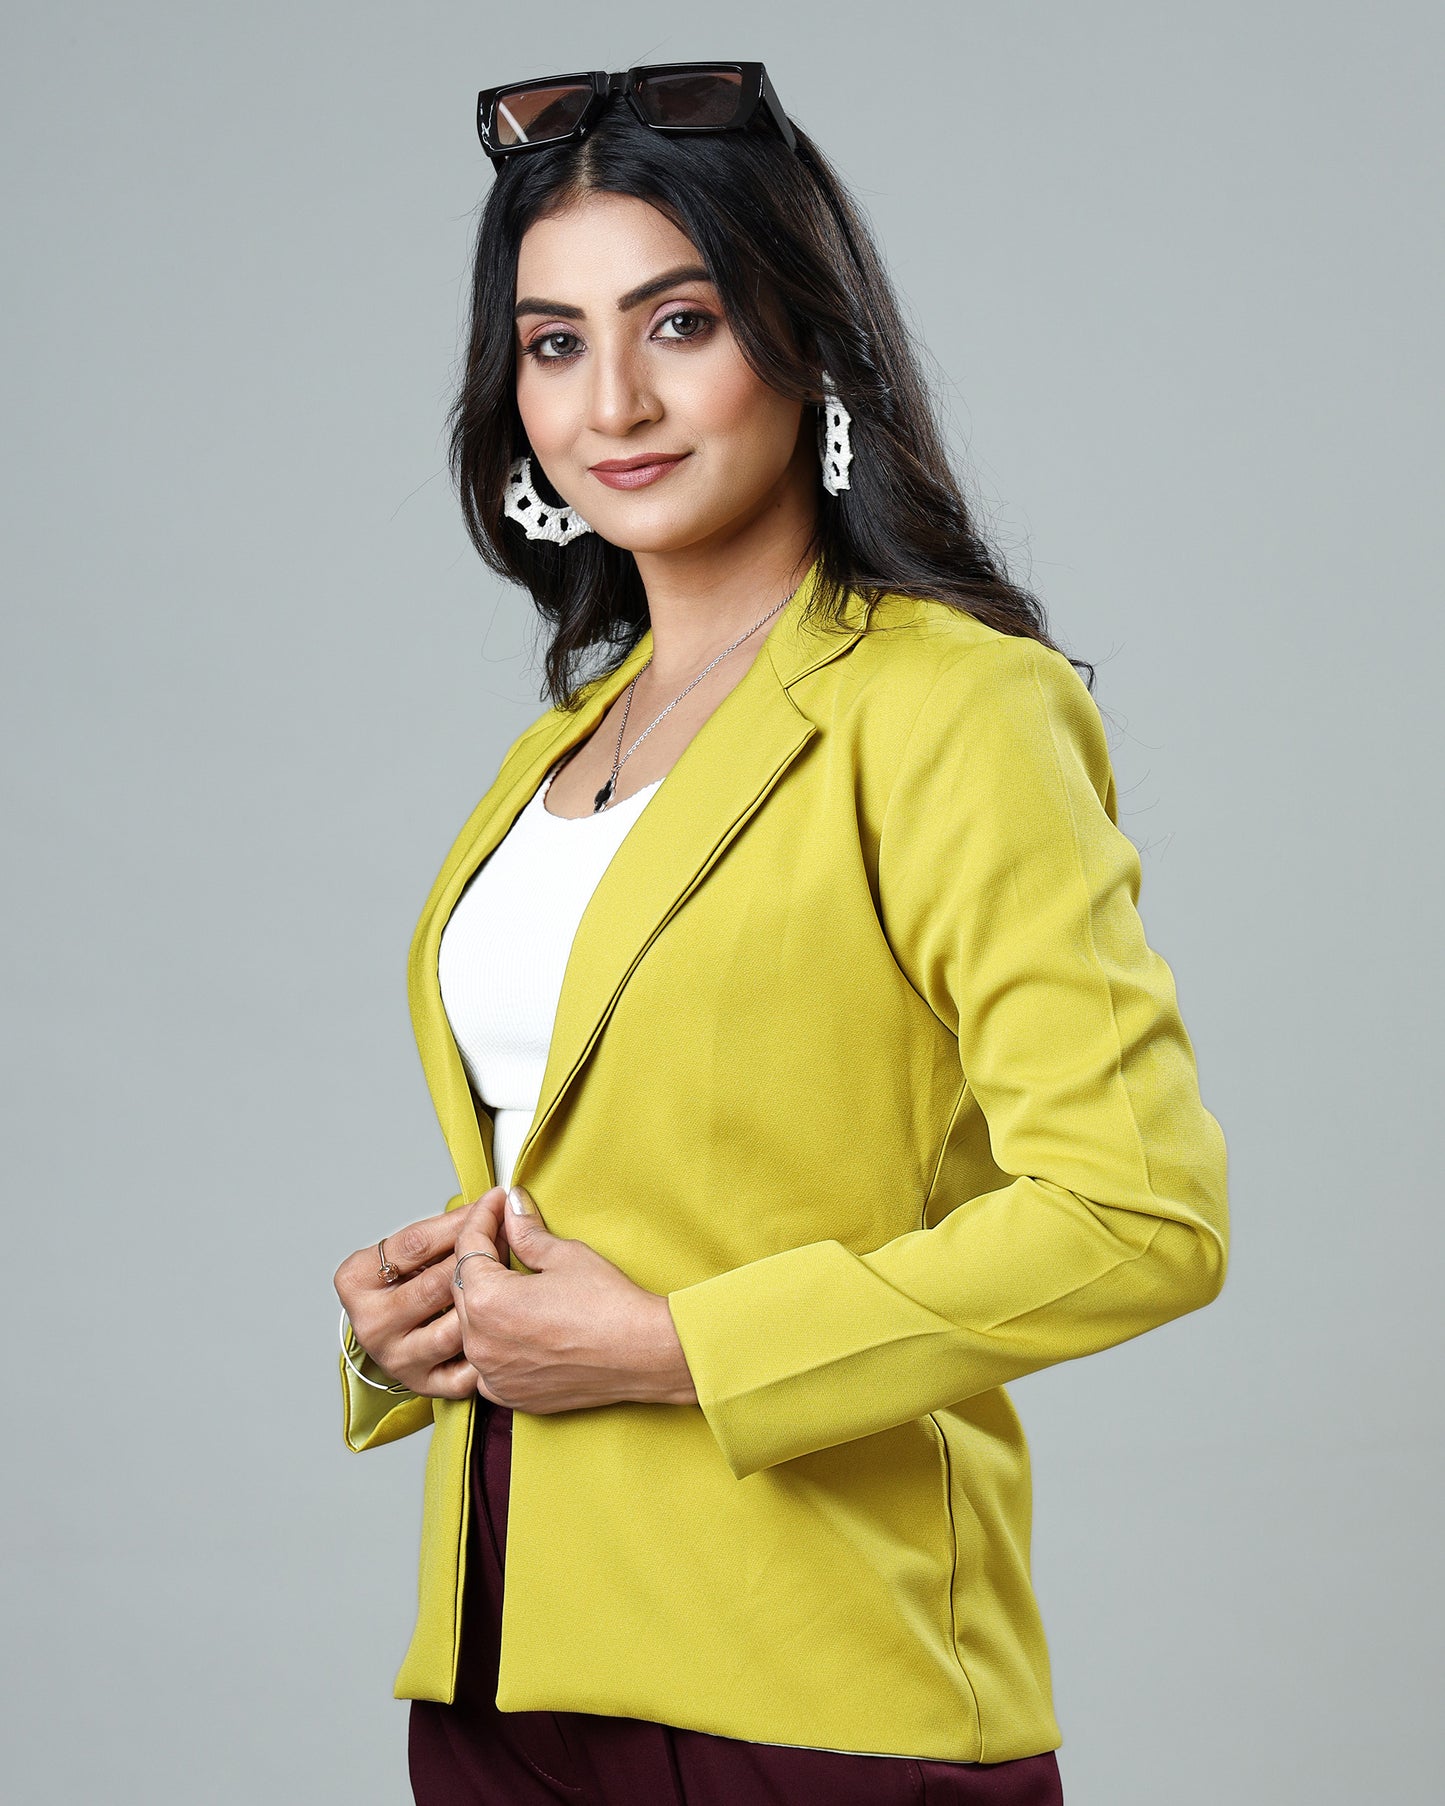 Luxe Touch Women Jacket: Classic Colors, Enduring Style